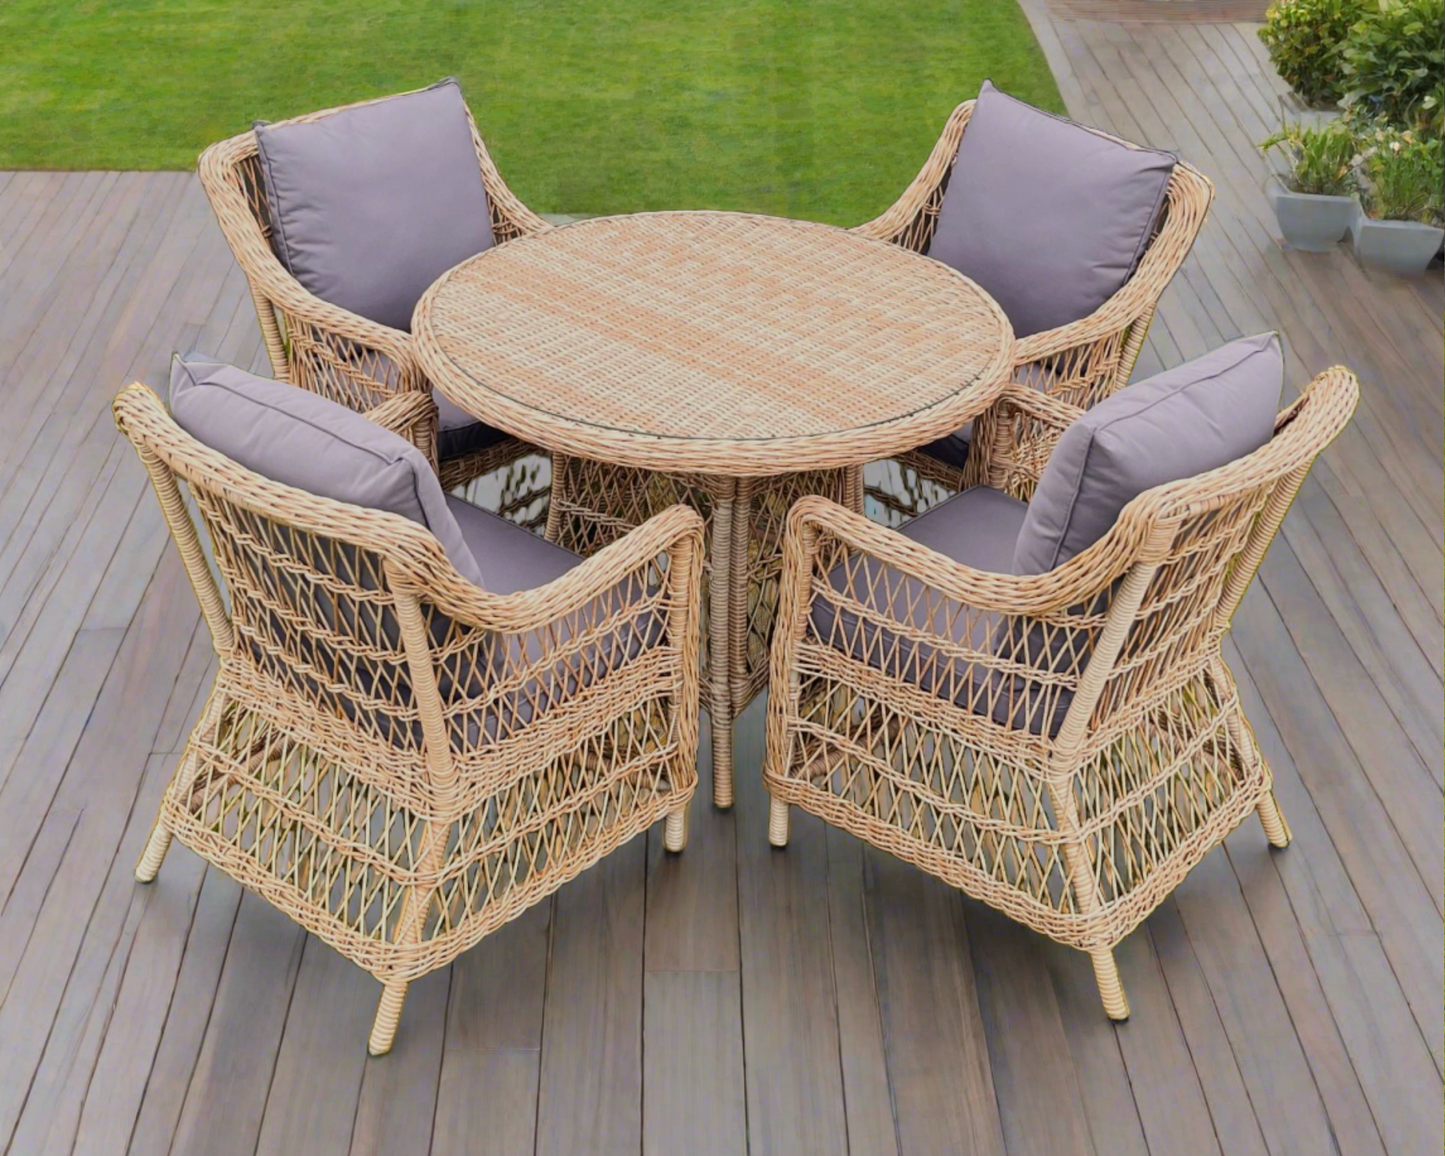 AMOIR 5-Piece Set Outdoor Wicker 4 Seat Dining Table Chair - Light Brown